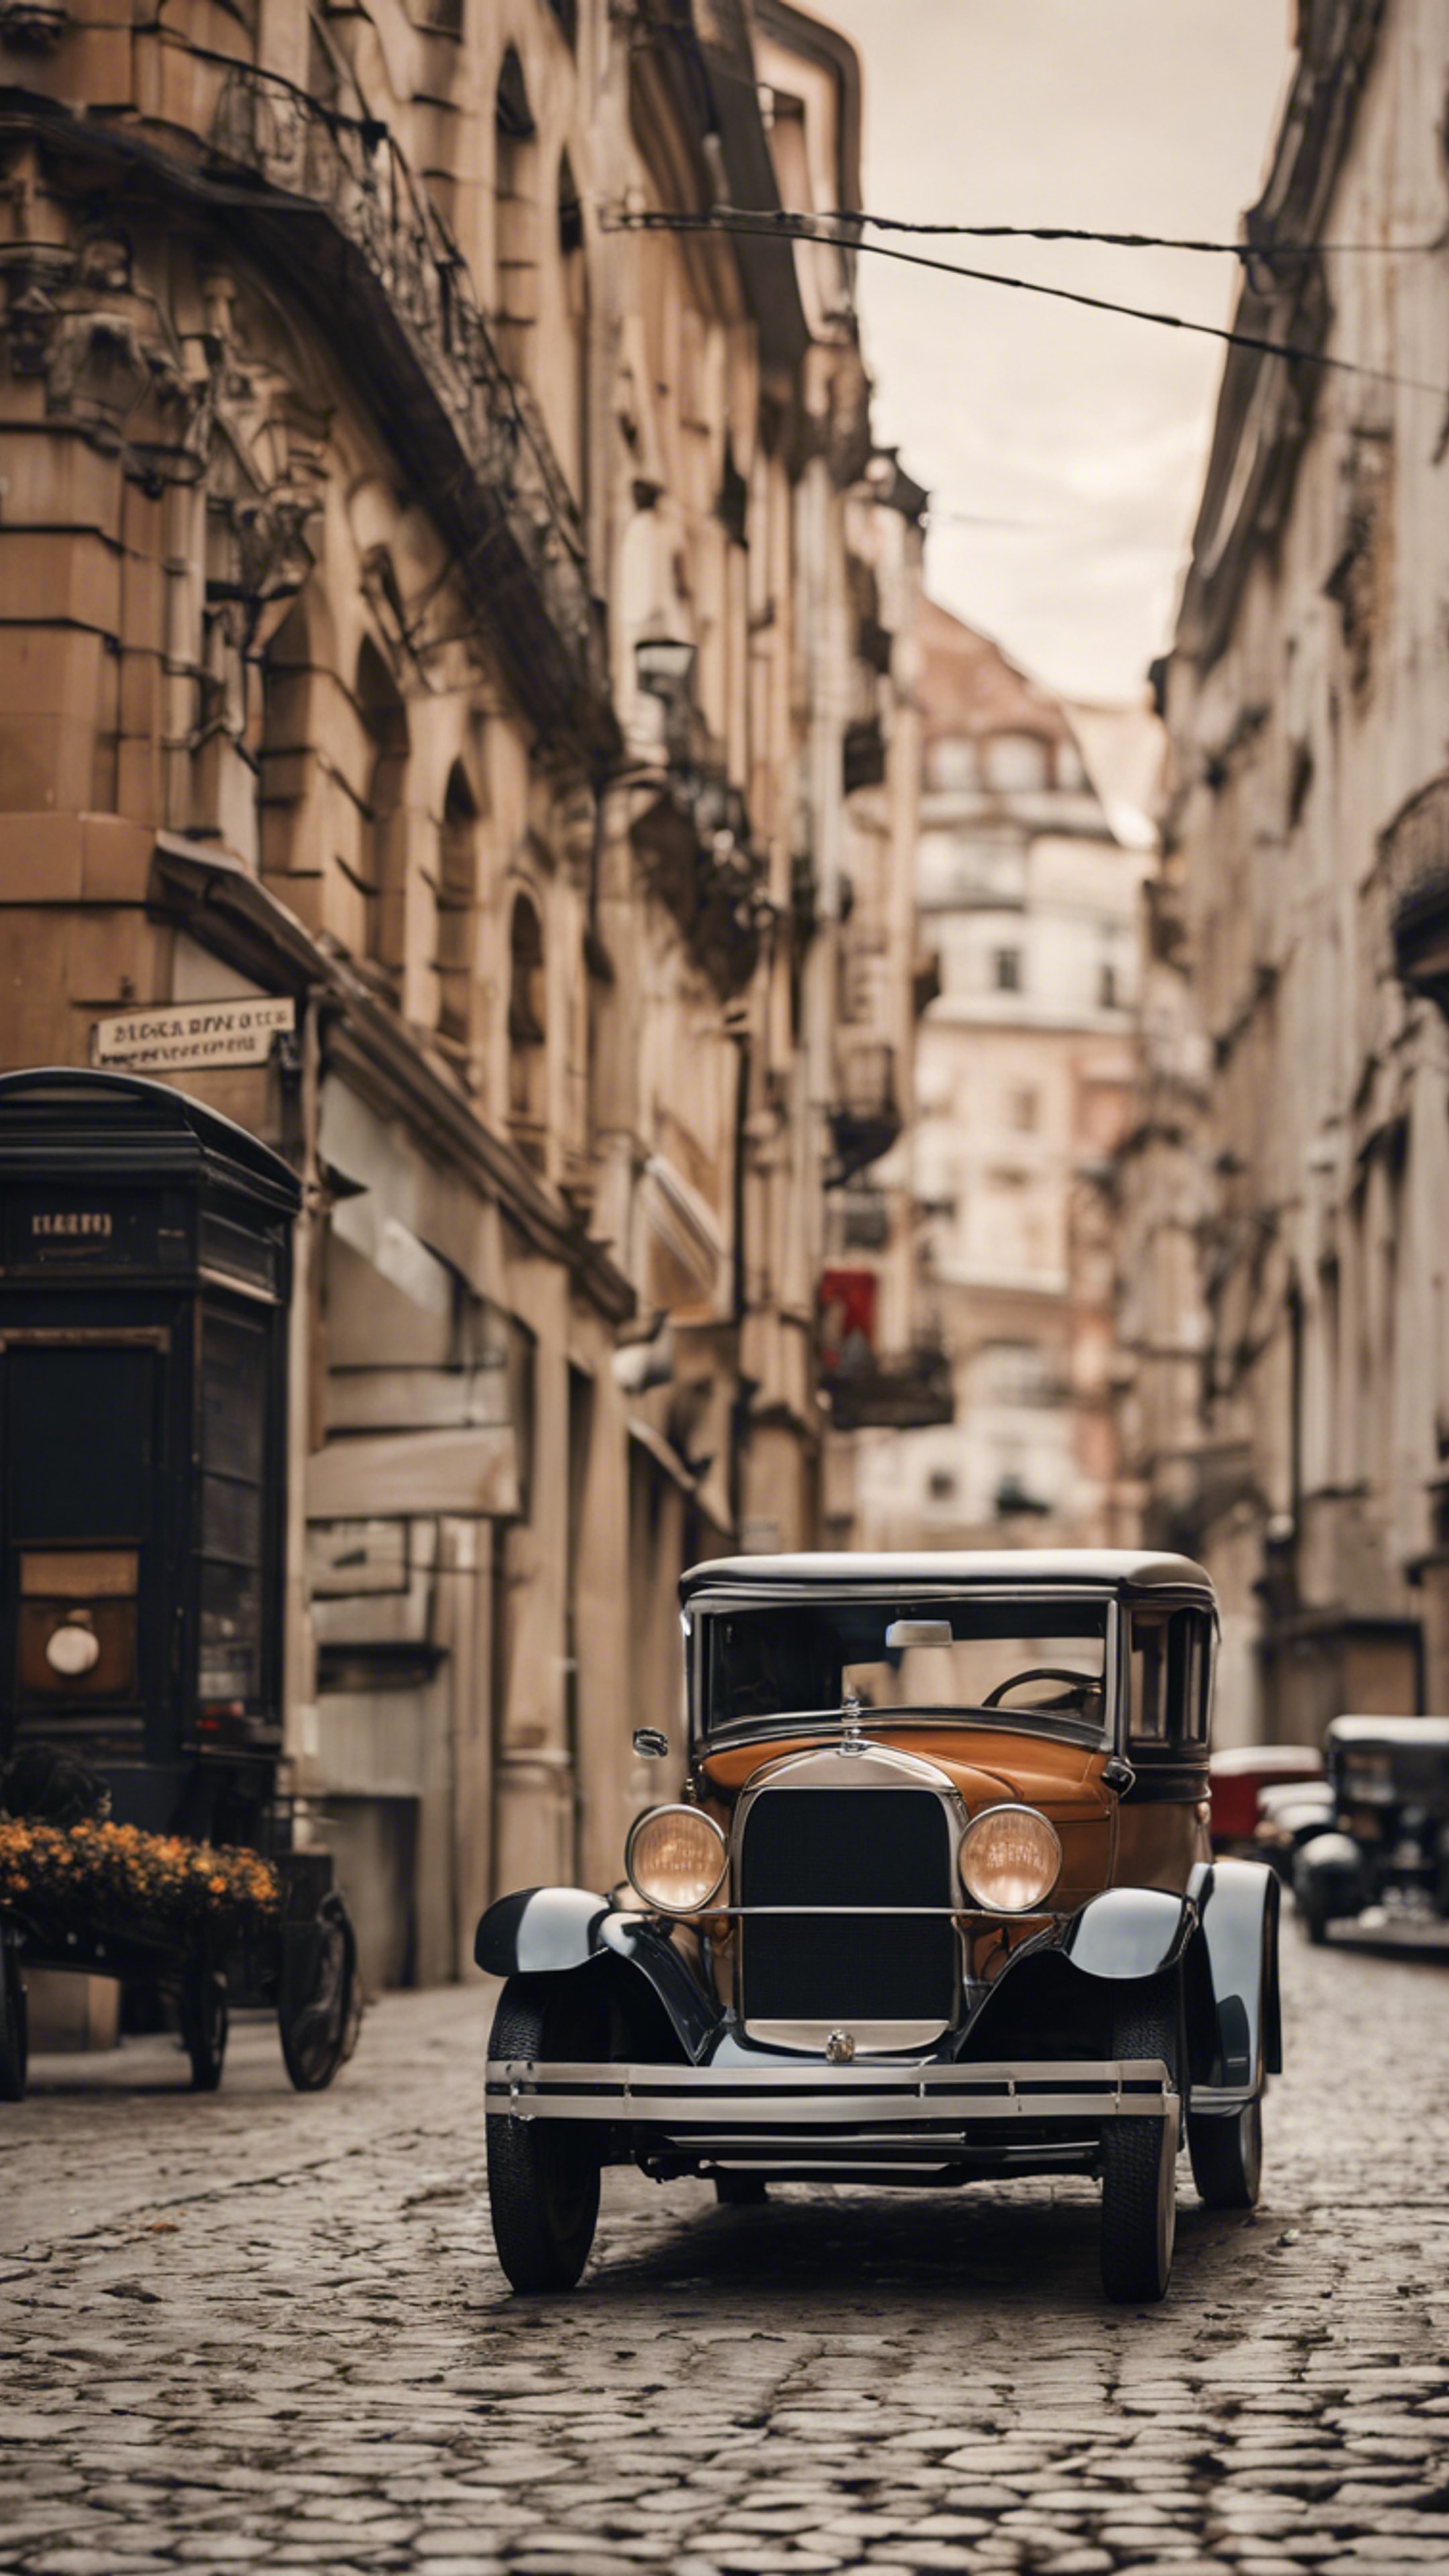 A nostalgic cityscape in the 1920s with classic cars and cobblestone streets. Tapeta[d252acda6f644acf85b4]